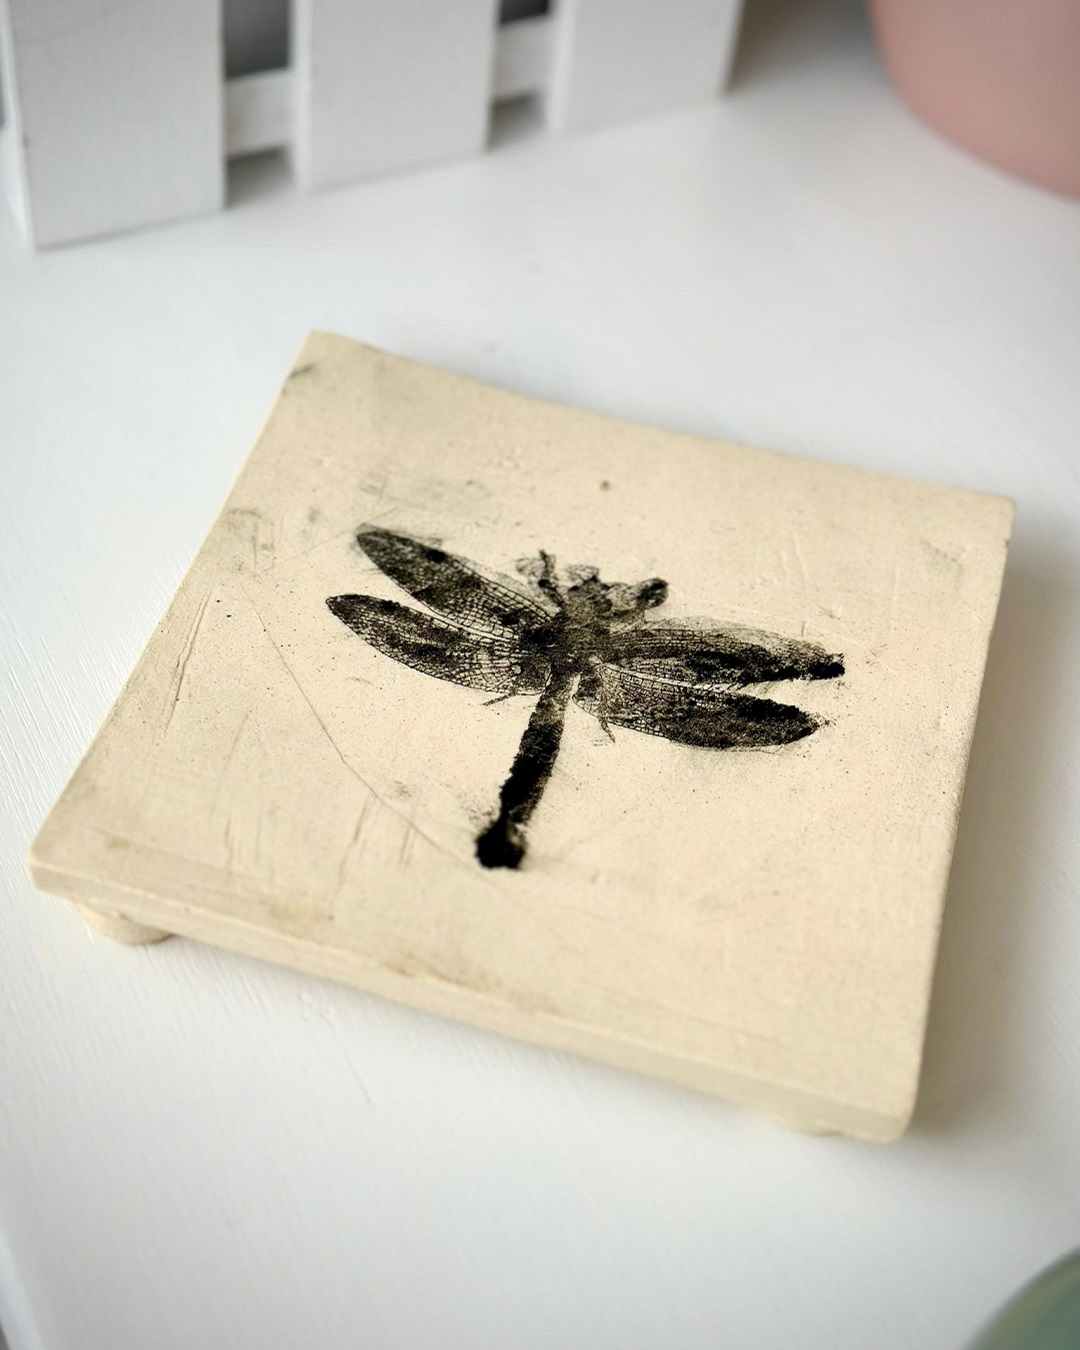 Square plinth with dragonfly print on it